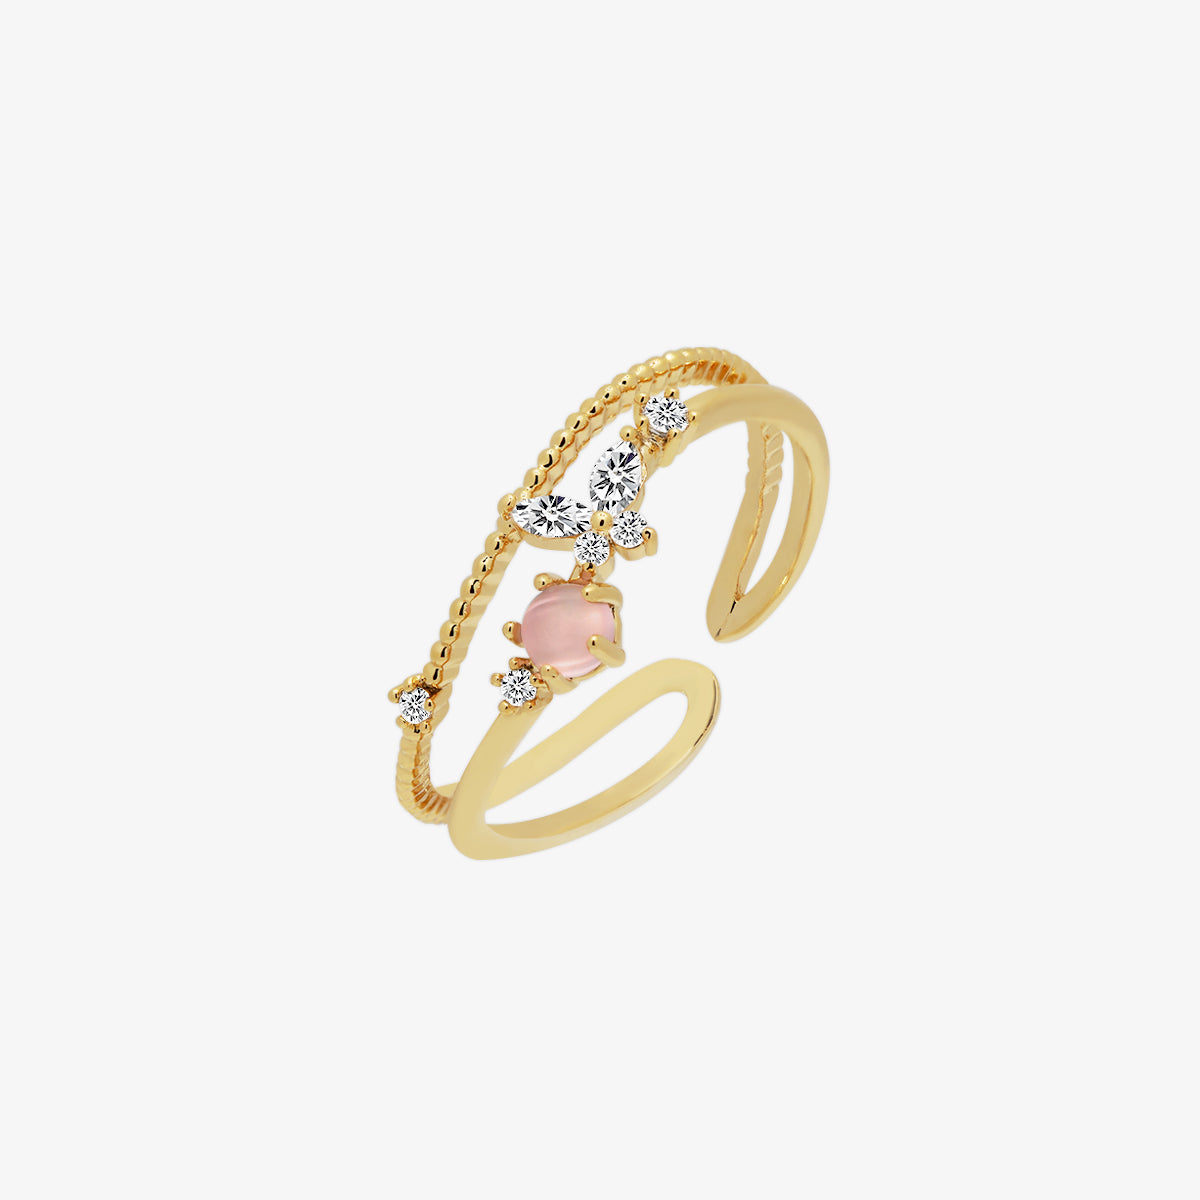 Pink butterfly ring